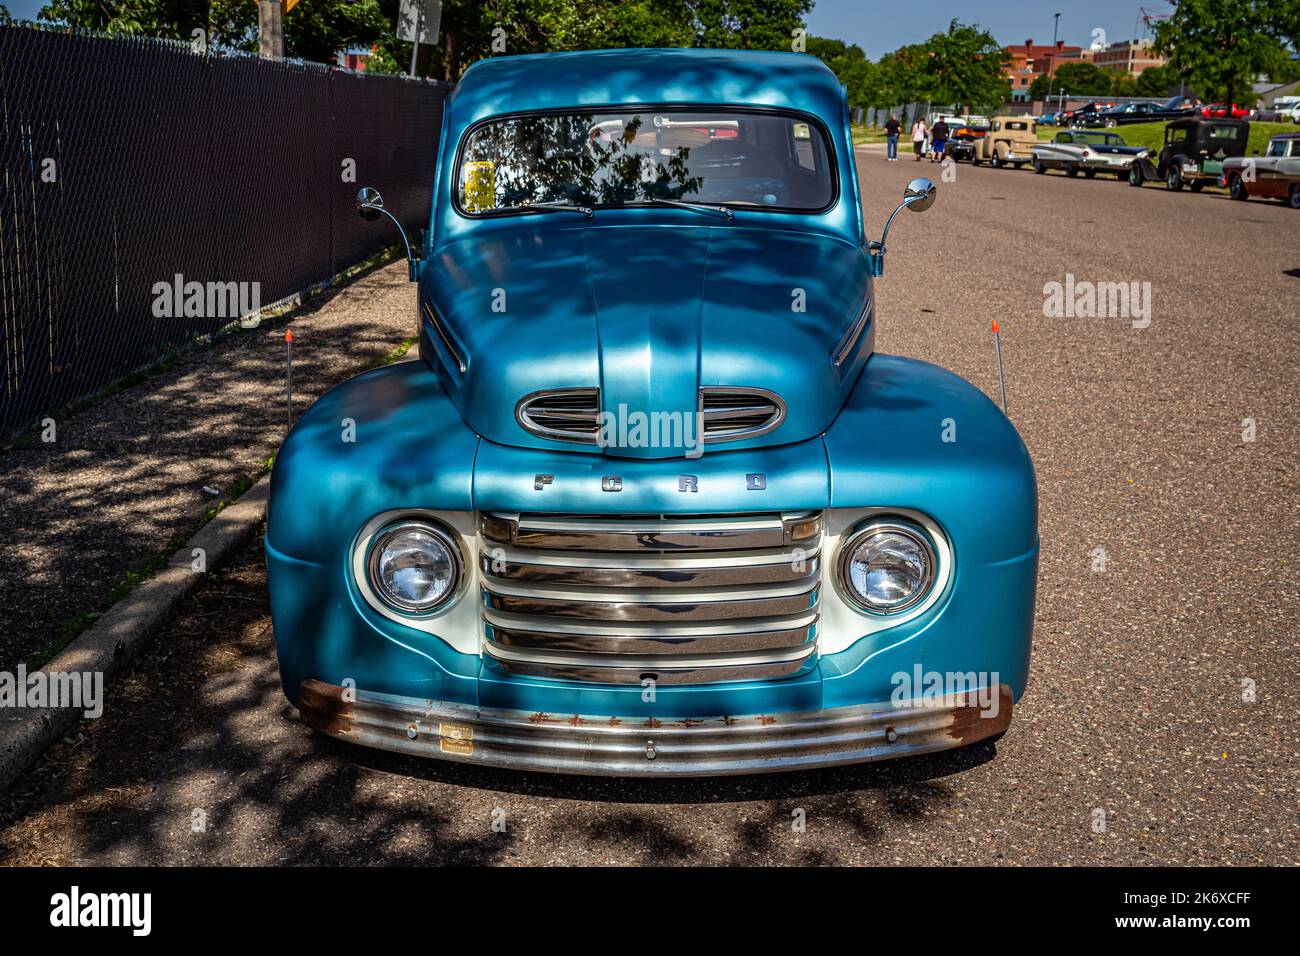 Falcon Heights, MN - June 19, 2022: High perspective front view of a Customized 1948 Ford F1 Panel Truck at a local car show. Stock Photo